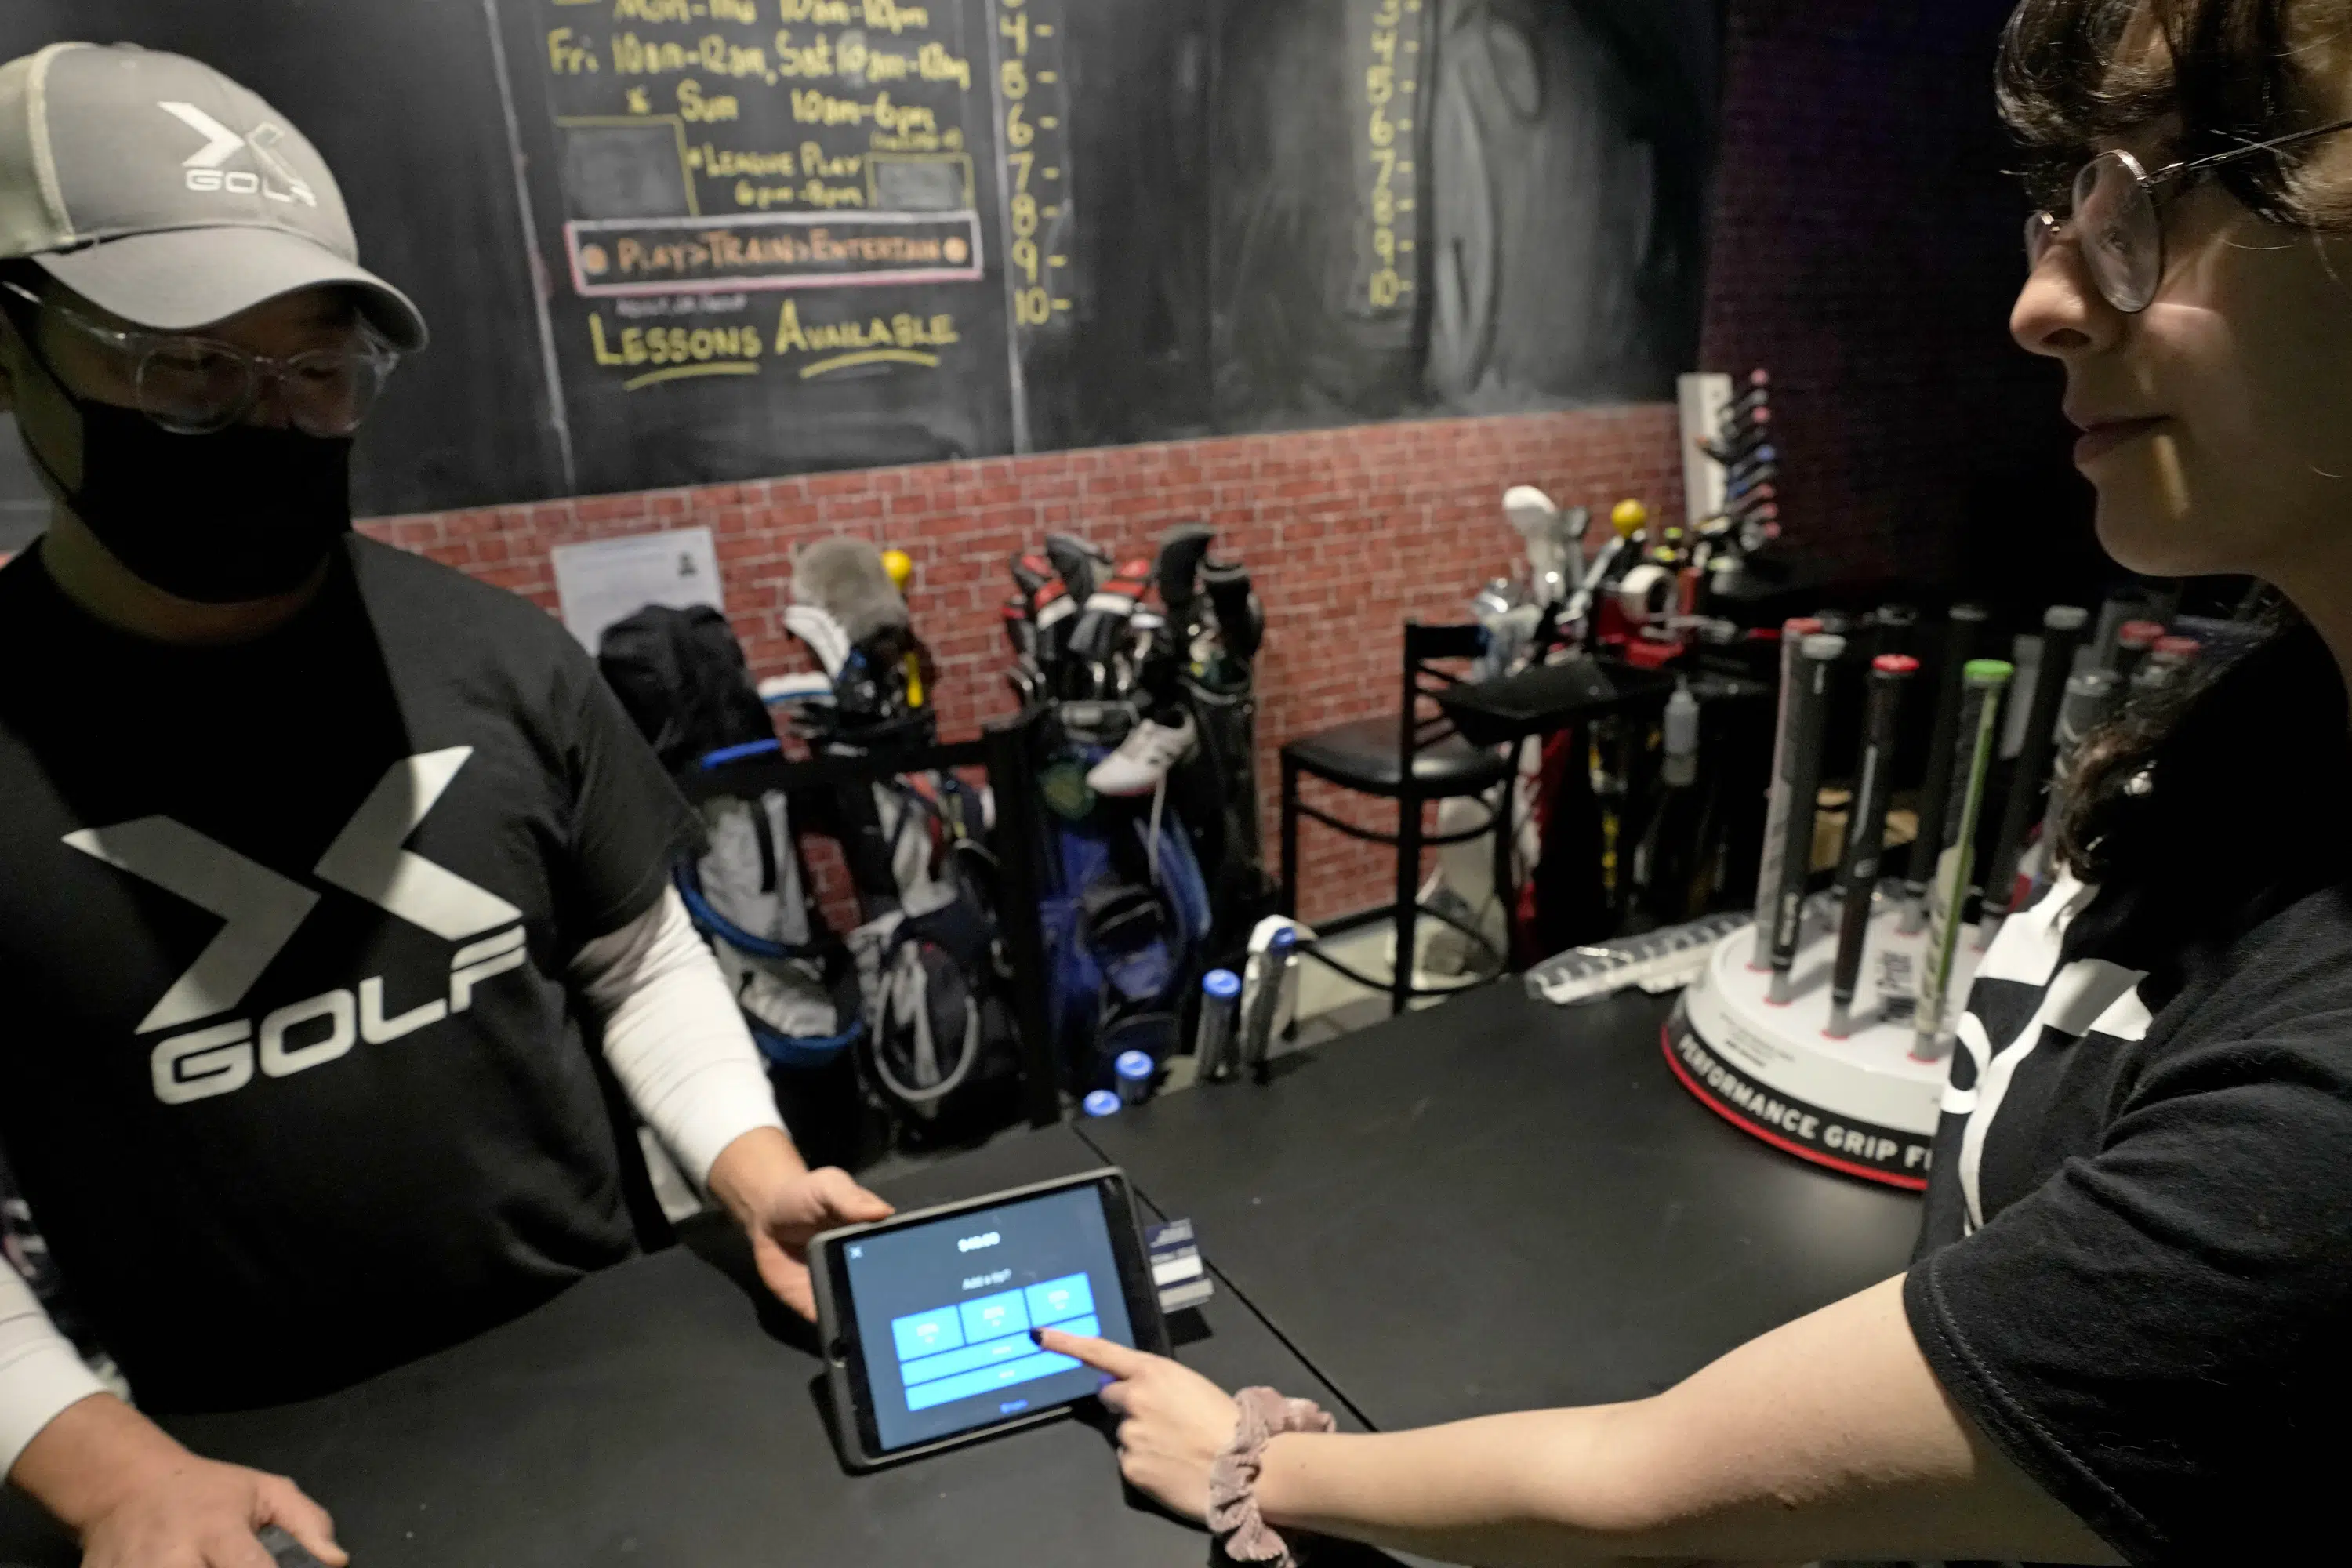 NEW YORK (AP) — Across the country, there’s a silent frustration brewing about an age-old practice that many say is getting out of hand: tipping. 